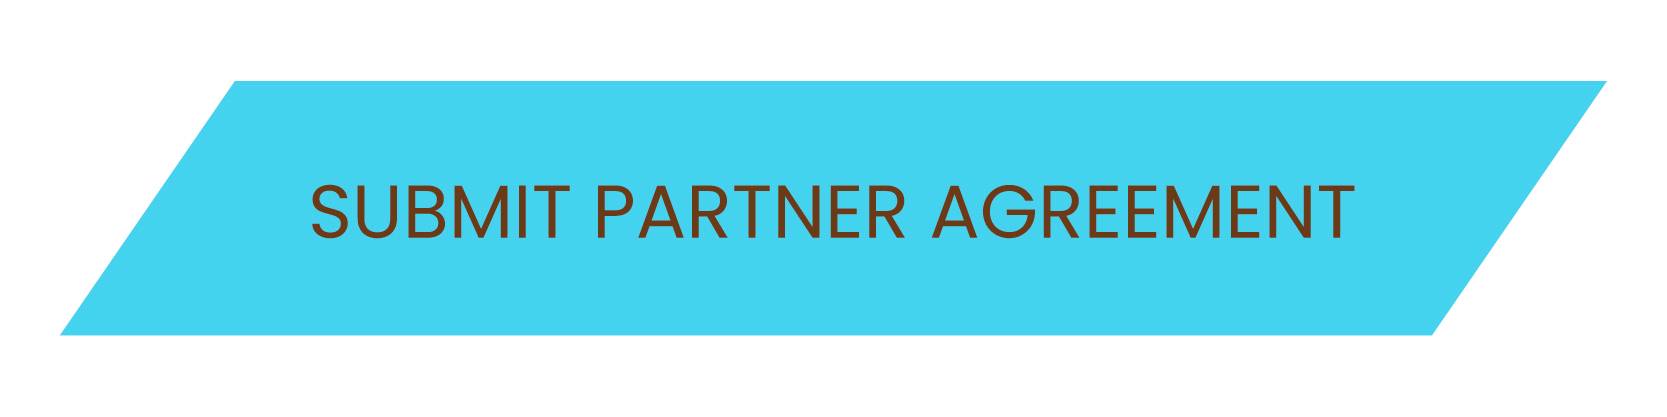 Submit Partner Agreement